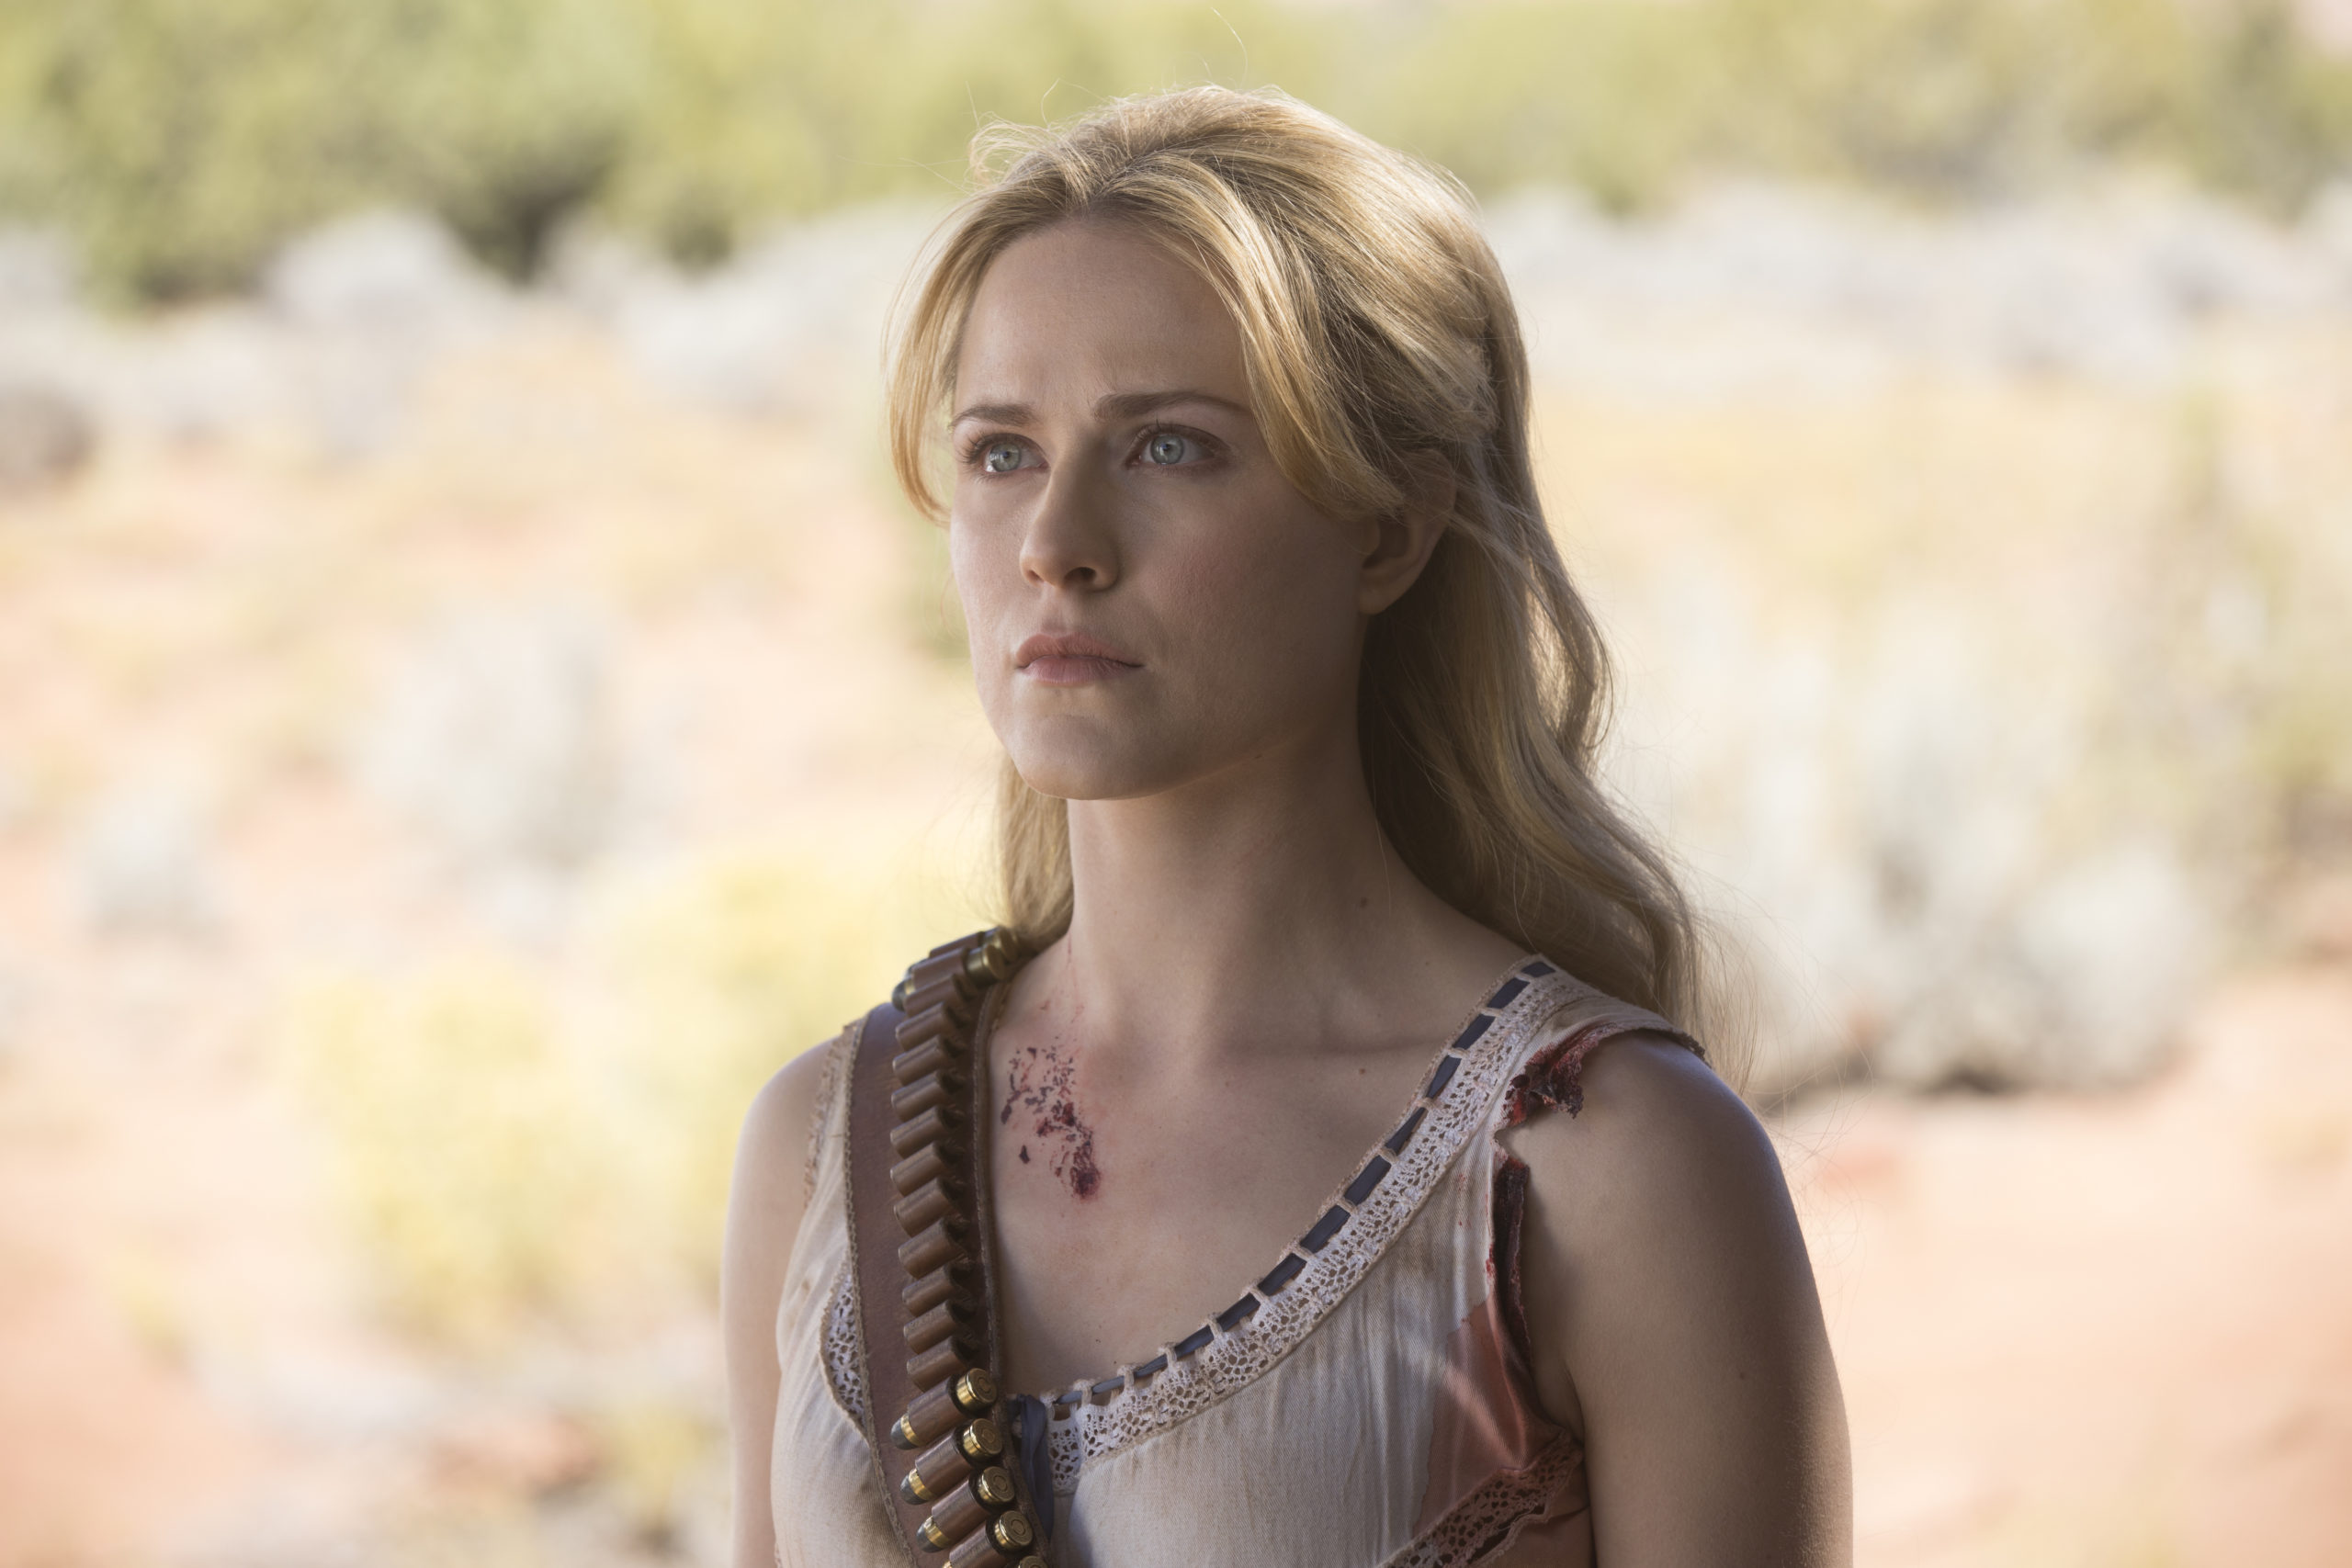 Westworld Approaches Its Endgame With Death, Tragedy And A Few Major Revelations